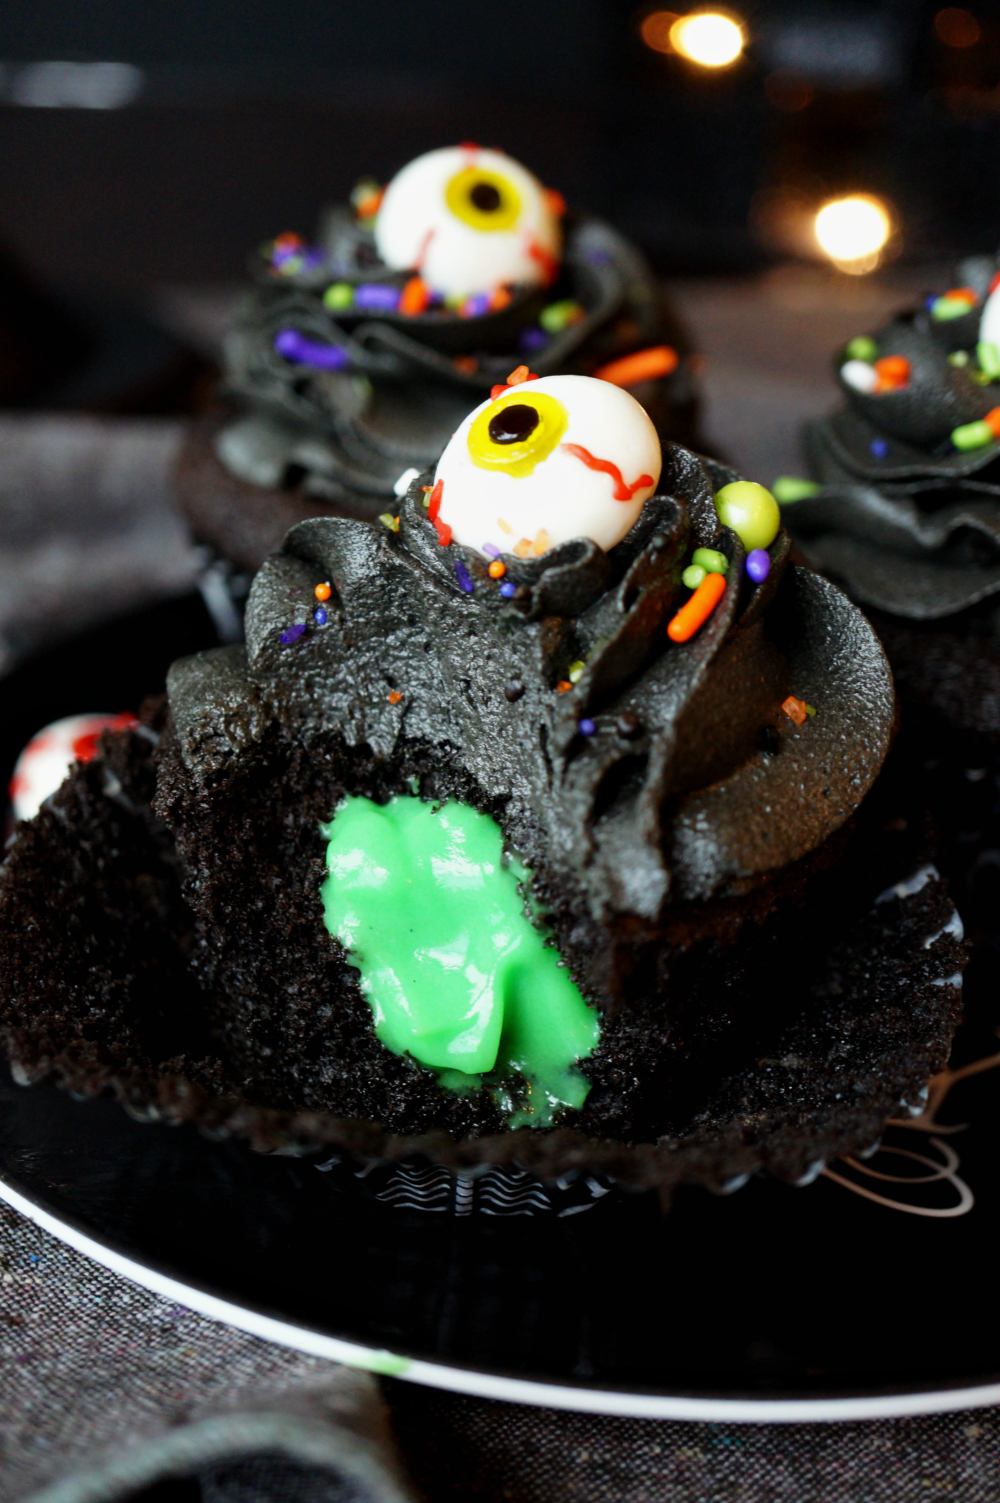 Black chocolate cupcakes with slime filling | The Baking Fairy